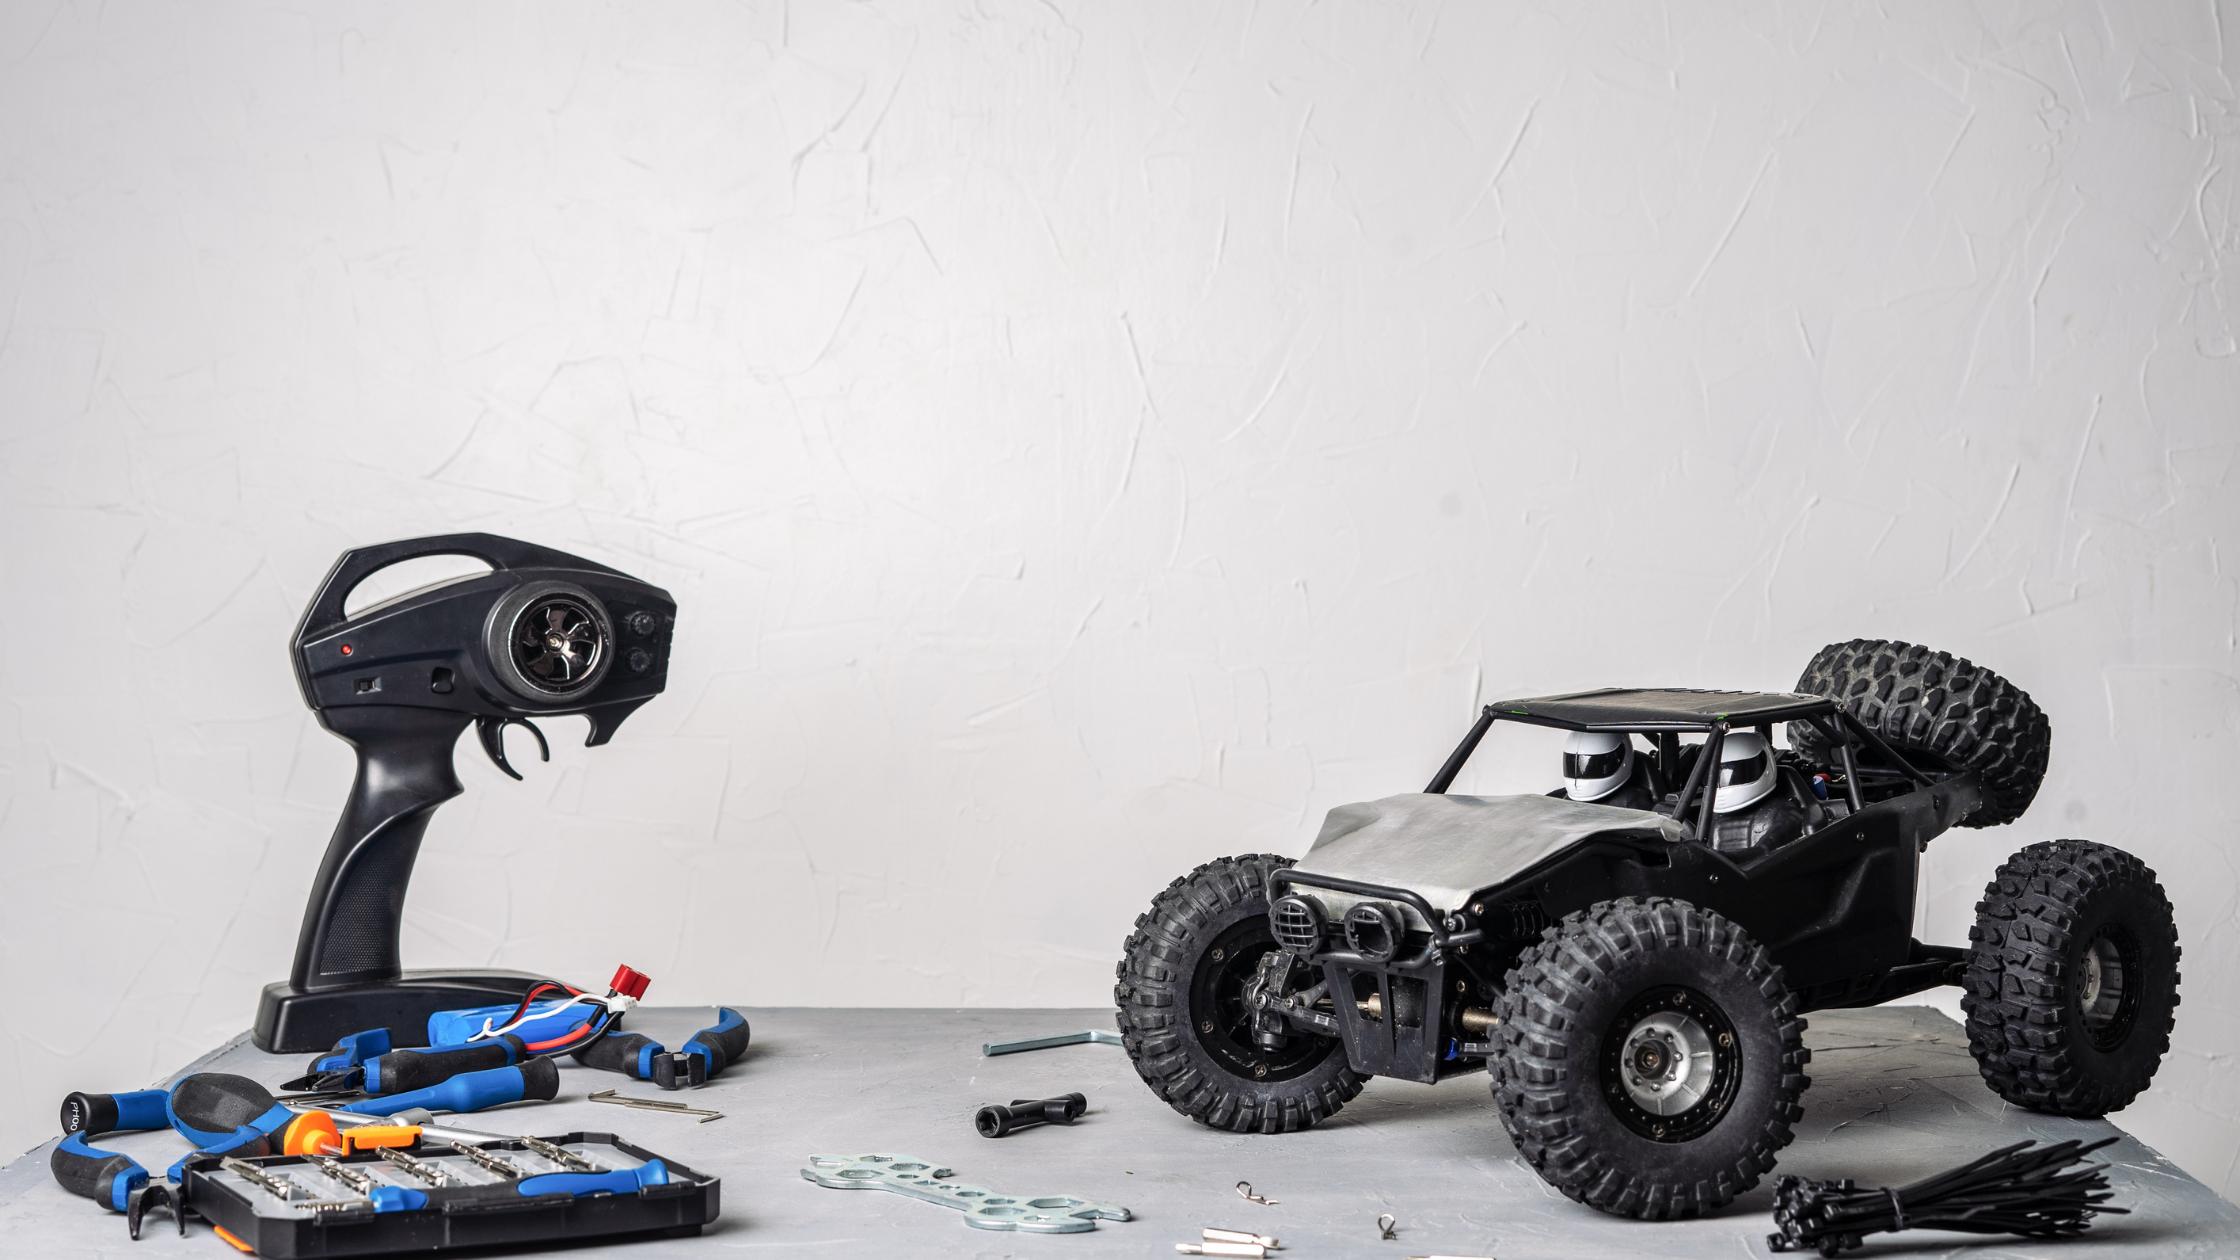 Rc Tracked Vehicle: Maintenance and care for optimal performance.